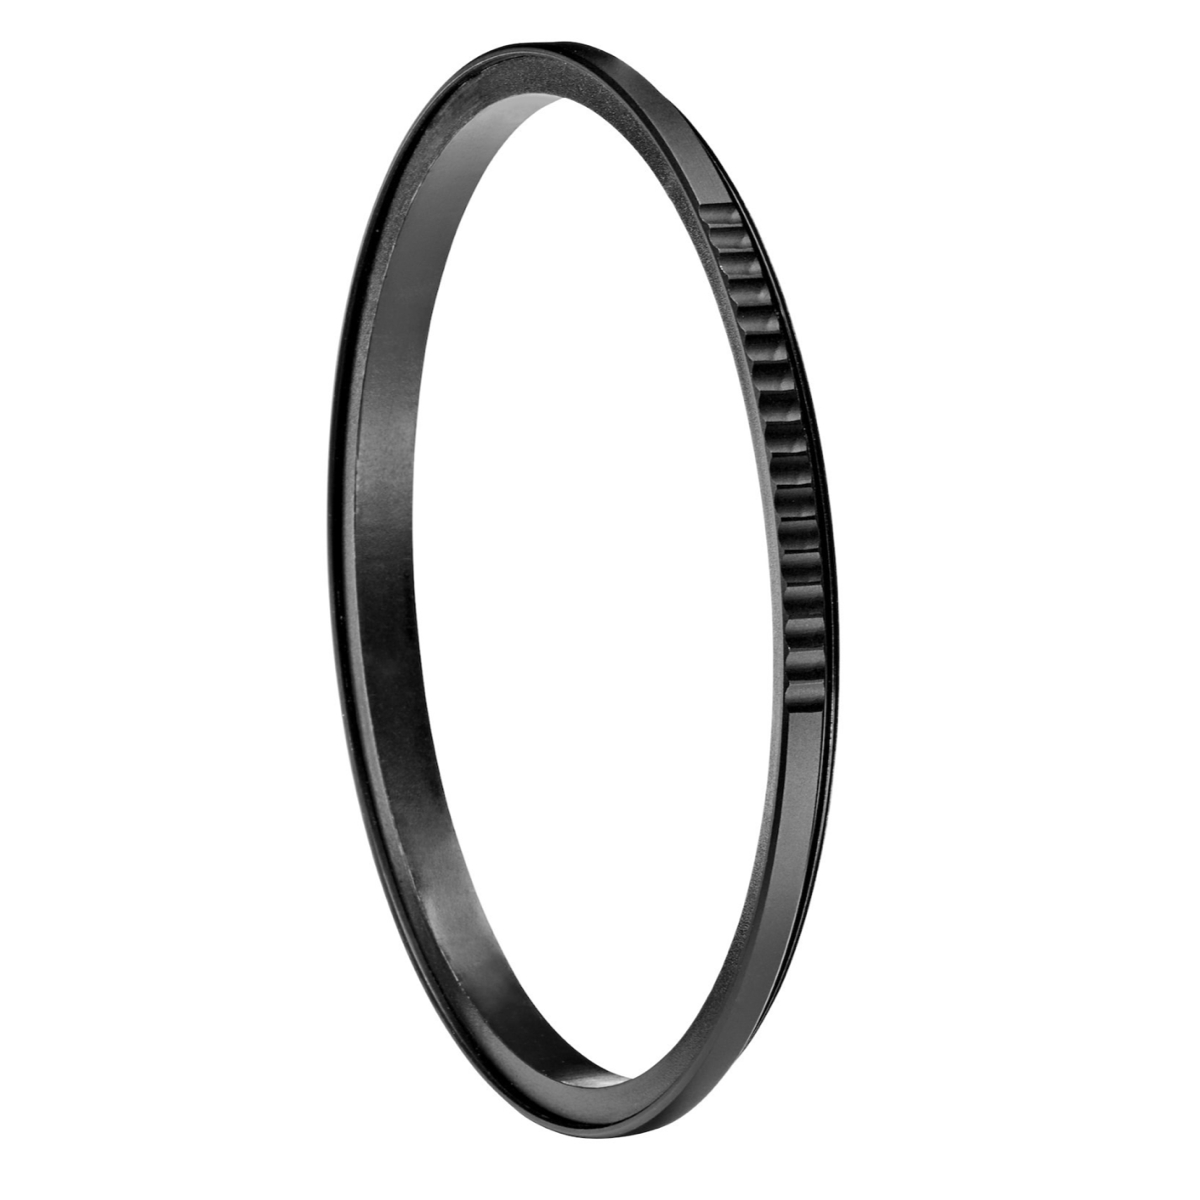 Manfrotto XUME 77mm Lens Adapter